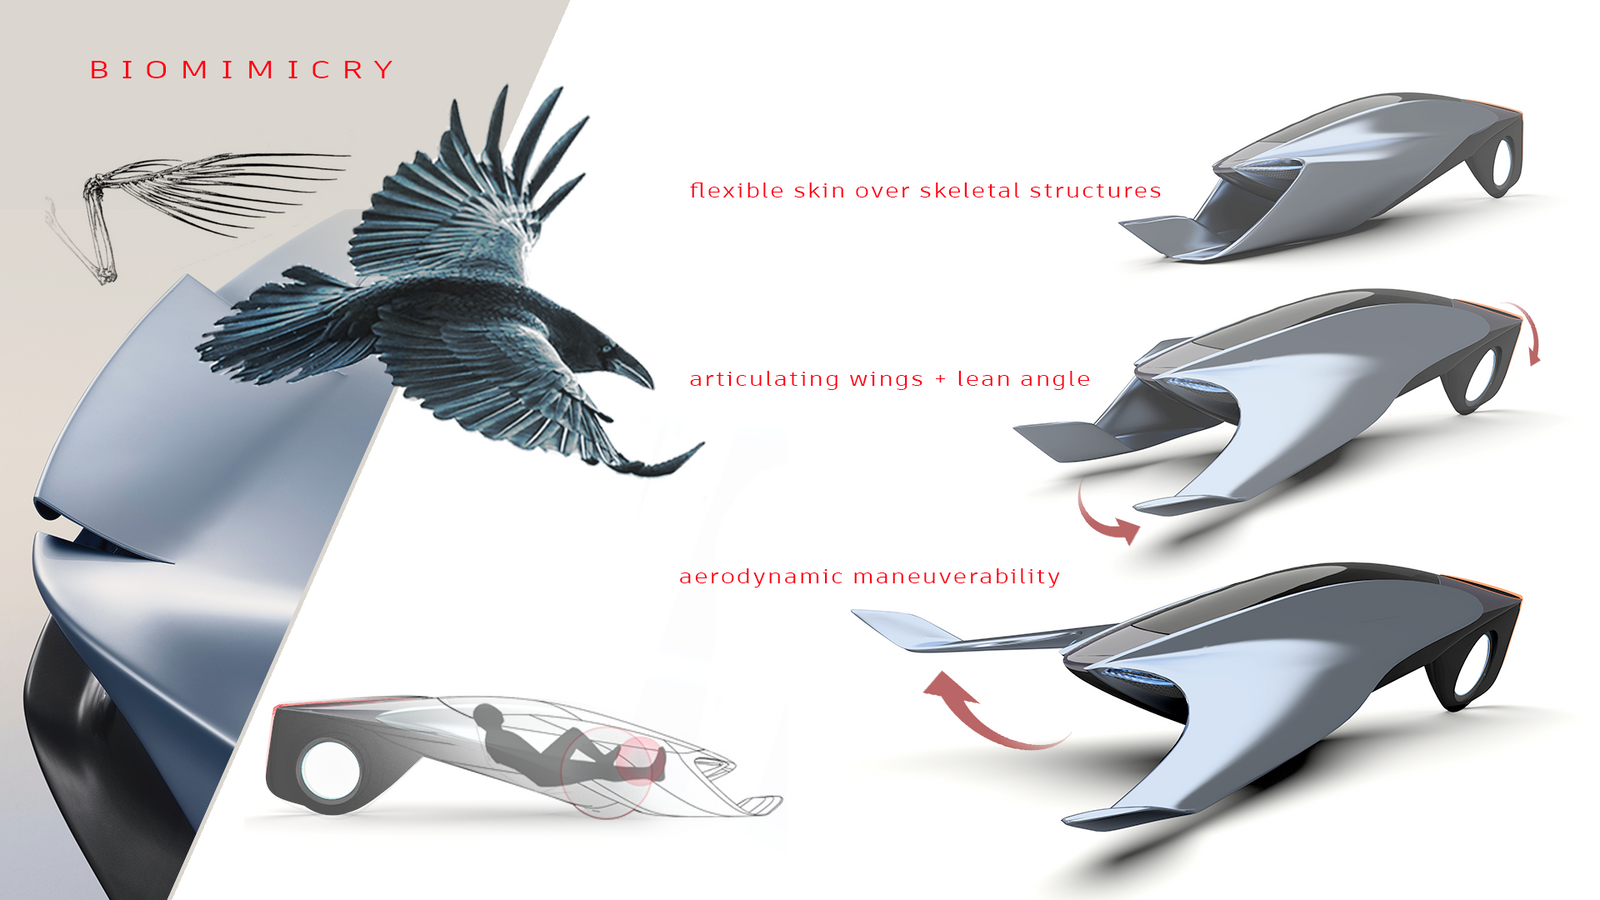 Biomimicry Application and Function